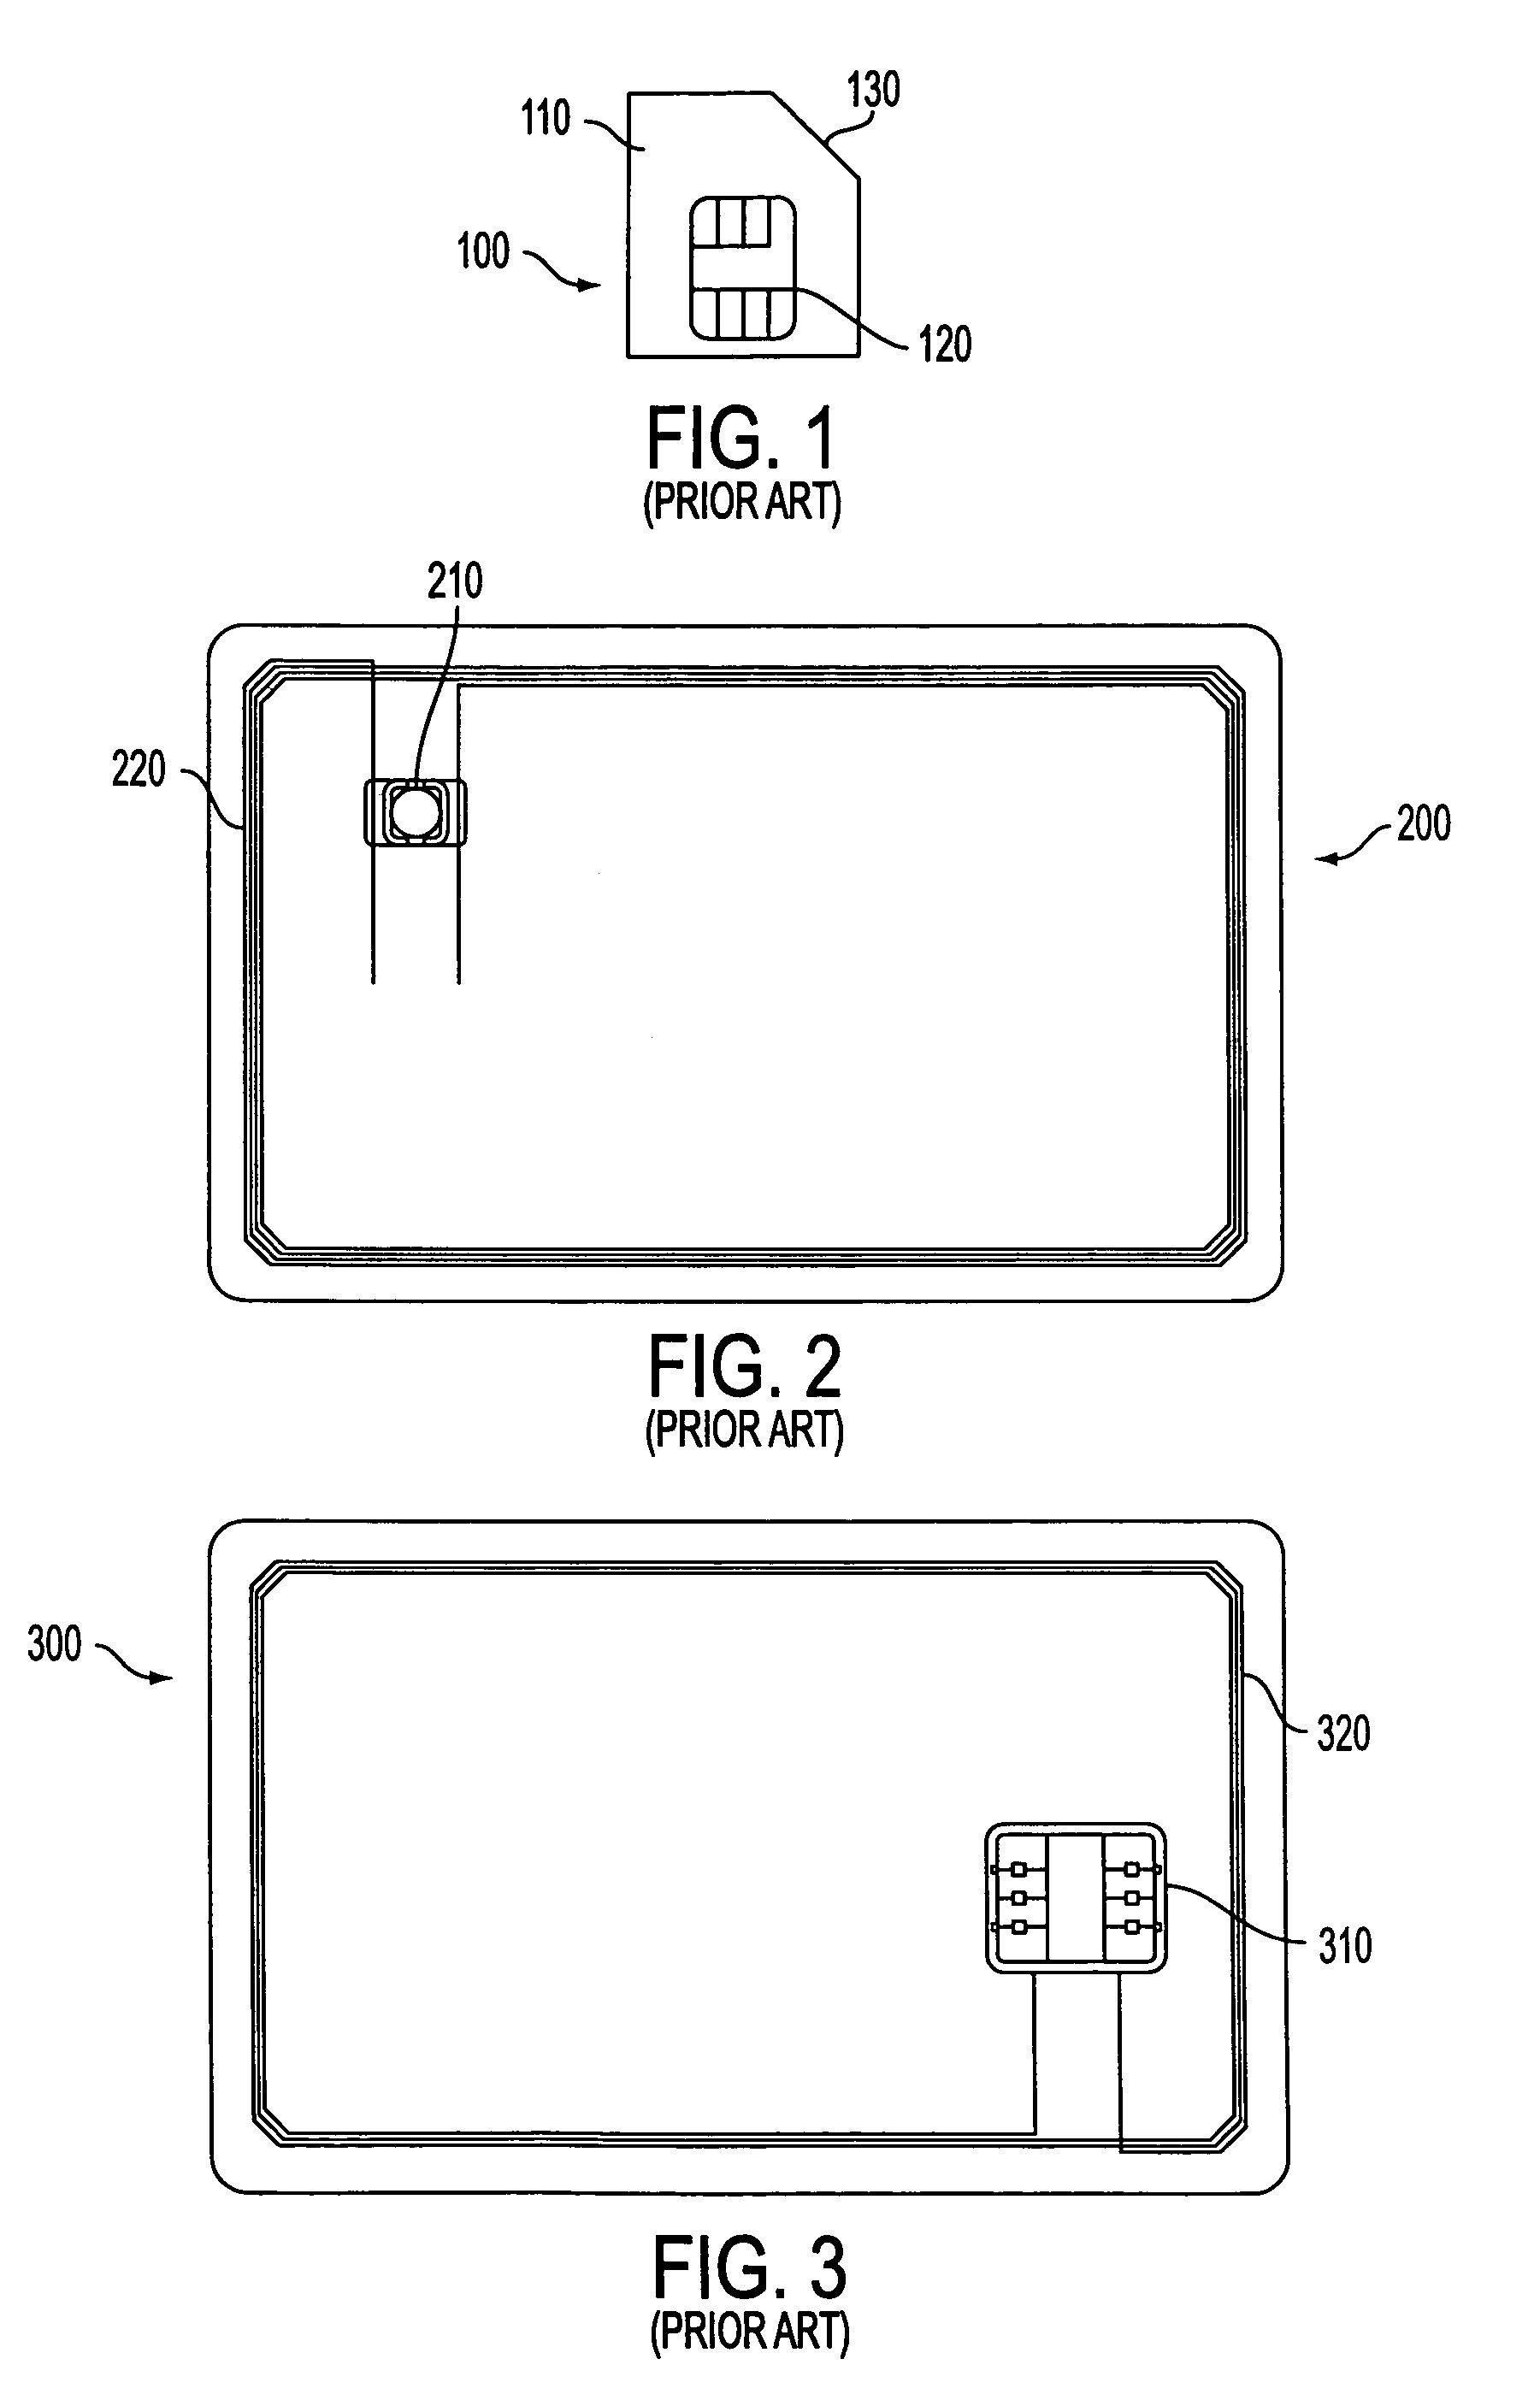 Contactless SIM card carrier with detachable antenna and carrier therefor